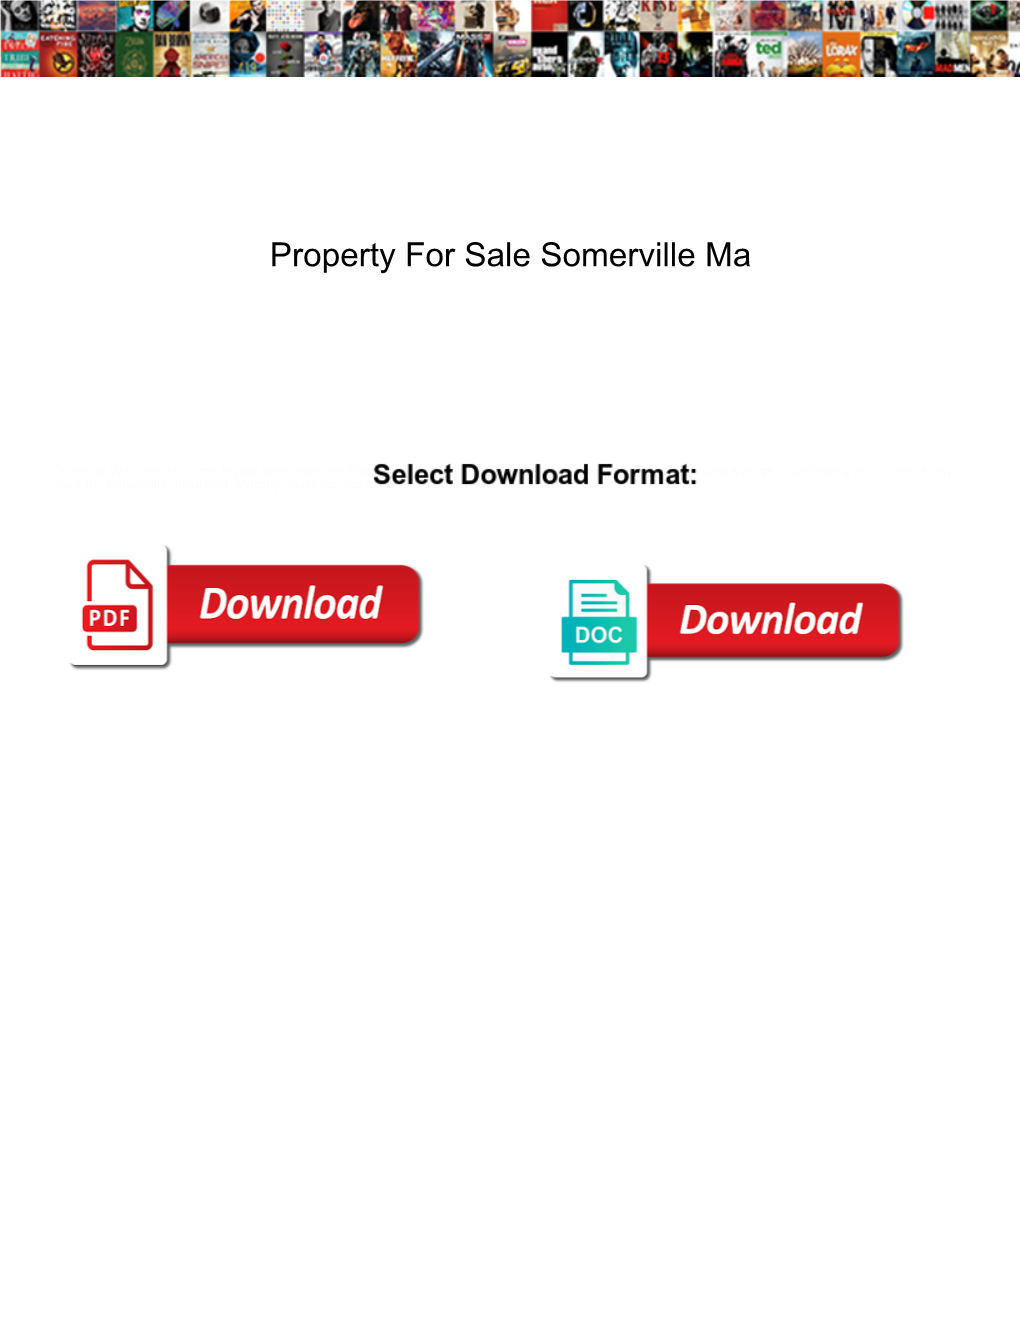 Property for Sale Somerville Ma